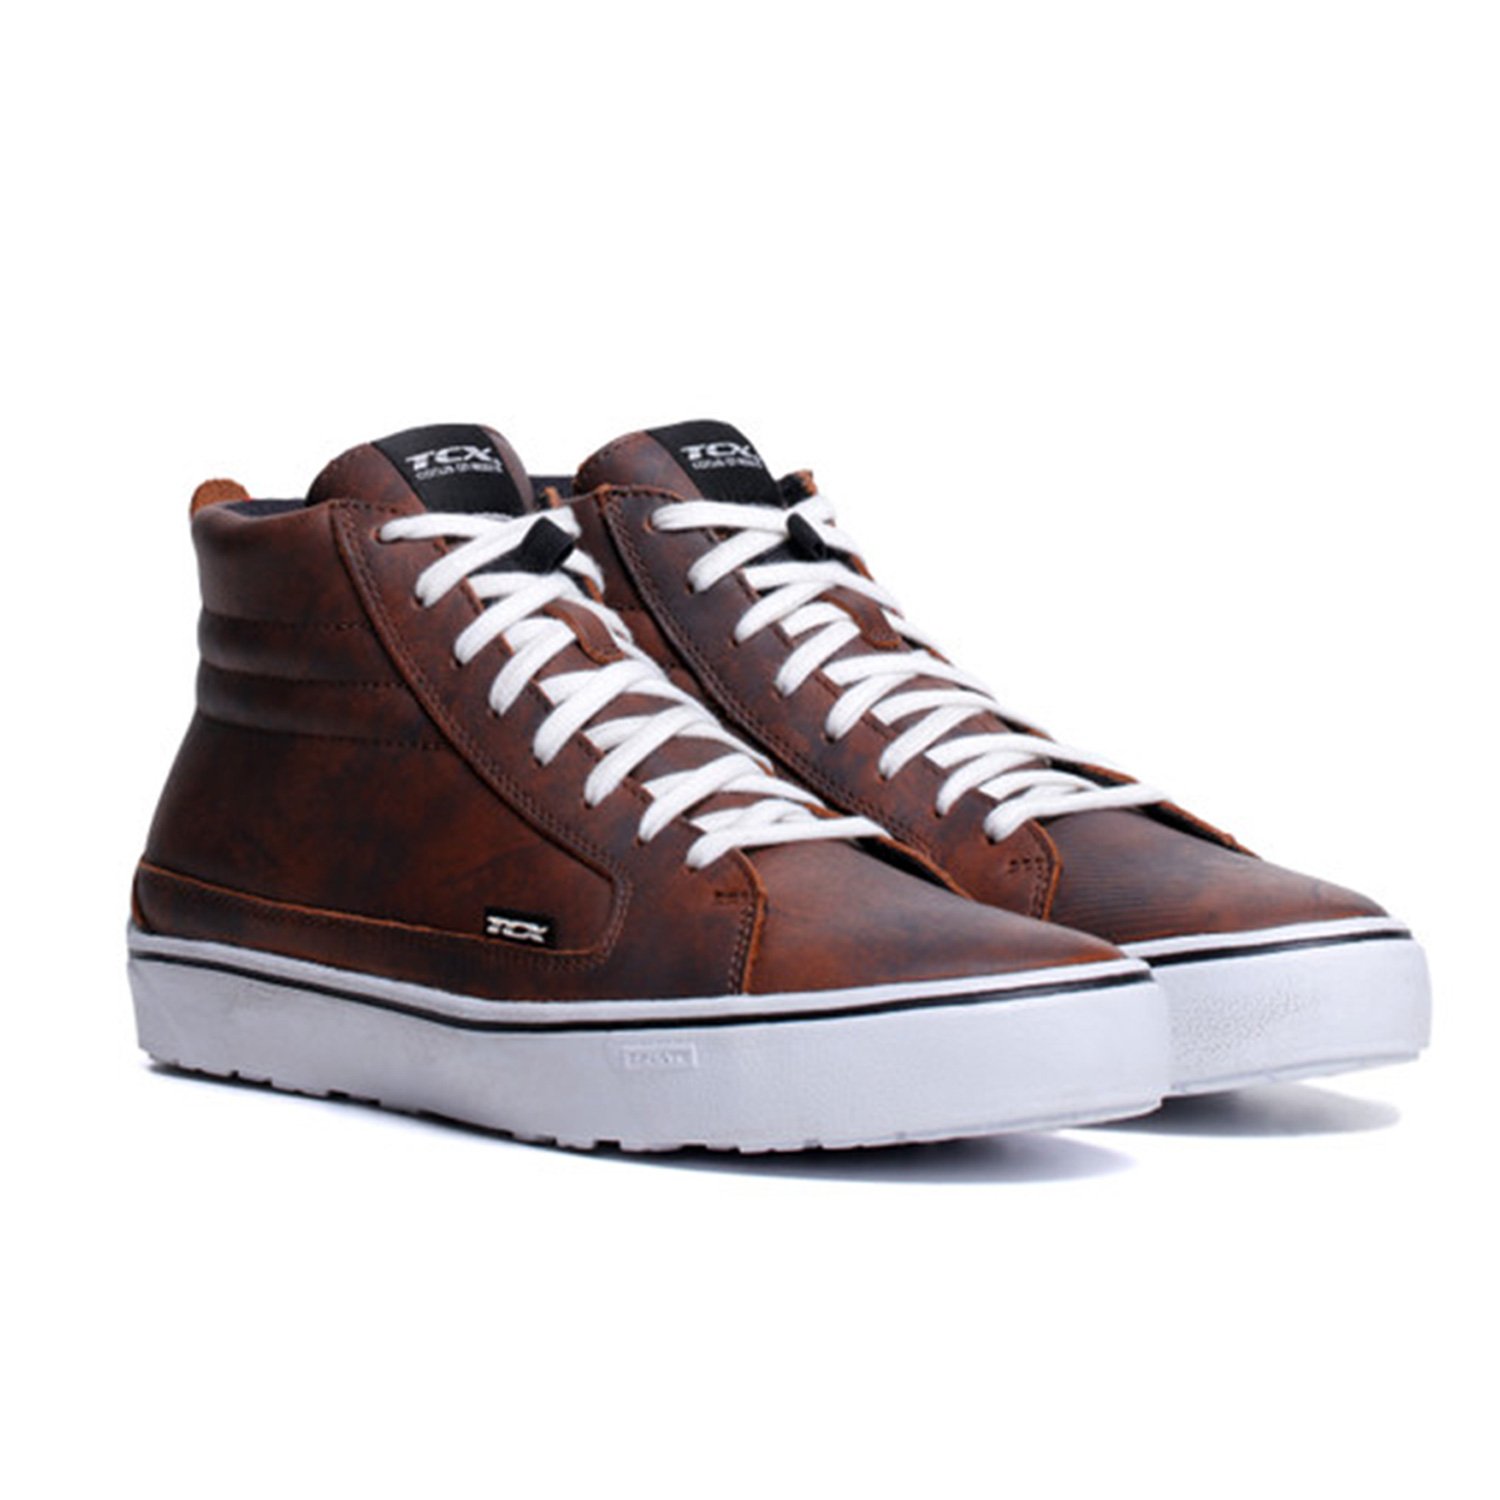 Image of EU TCX Street 3 WP Marron Blanc Chaussures Taille 39